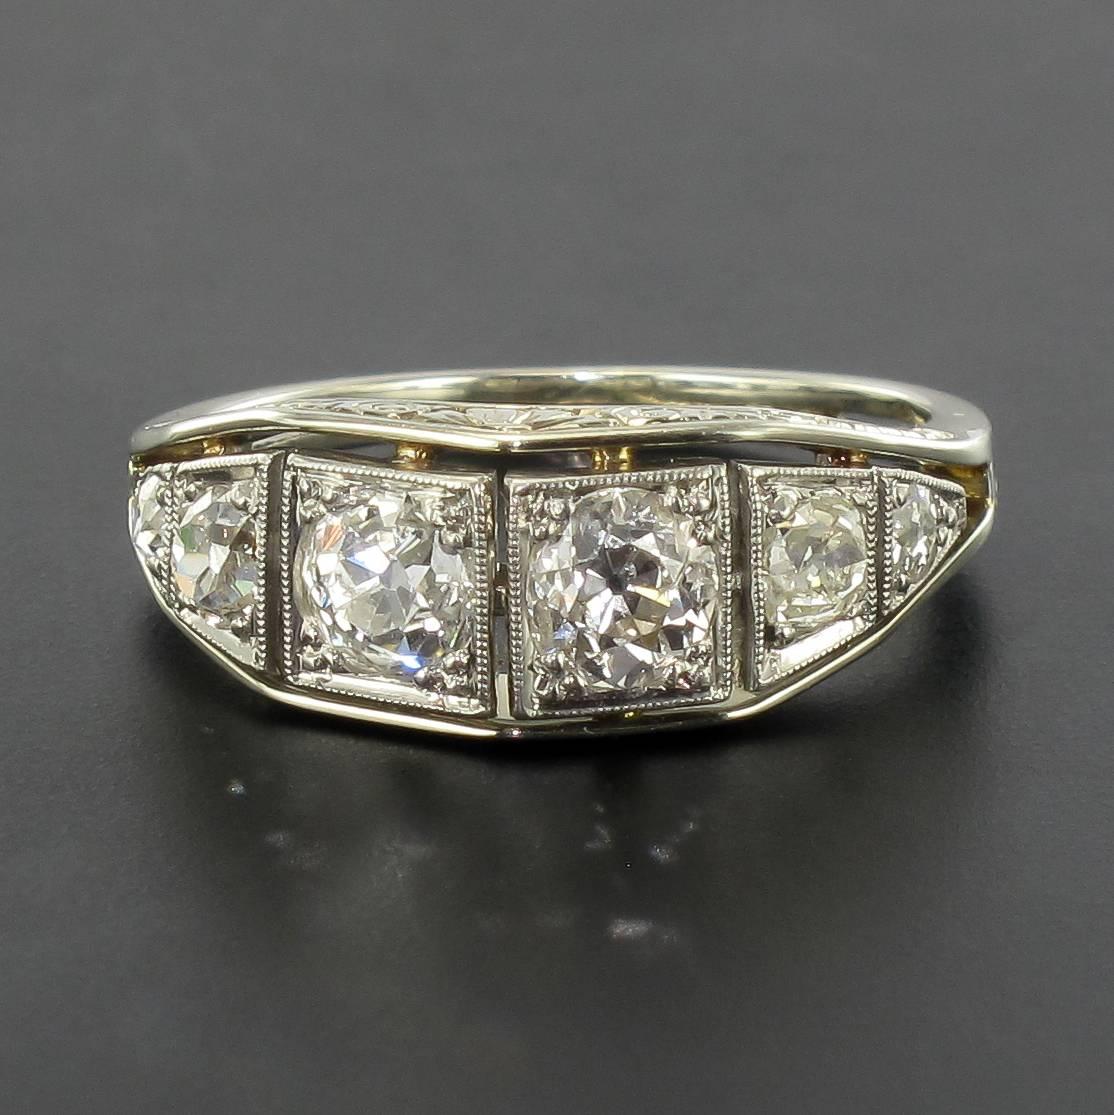 Ring in platinium and 18 carat white gold, dog and eagle heads hallmarks.

This splendid antique ring features a line of 5 antique brilliant cut diamonds surrounded by a wavy motif also set with 10 antique brilliant cut diamonds. The ring bed is